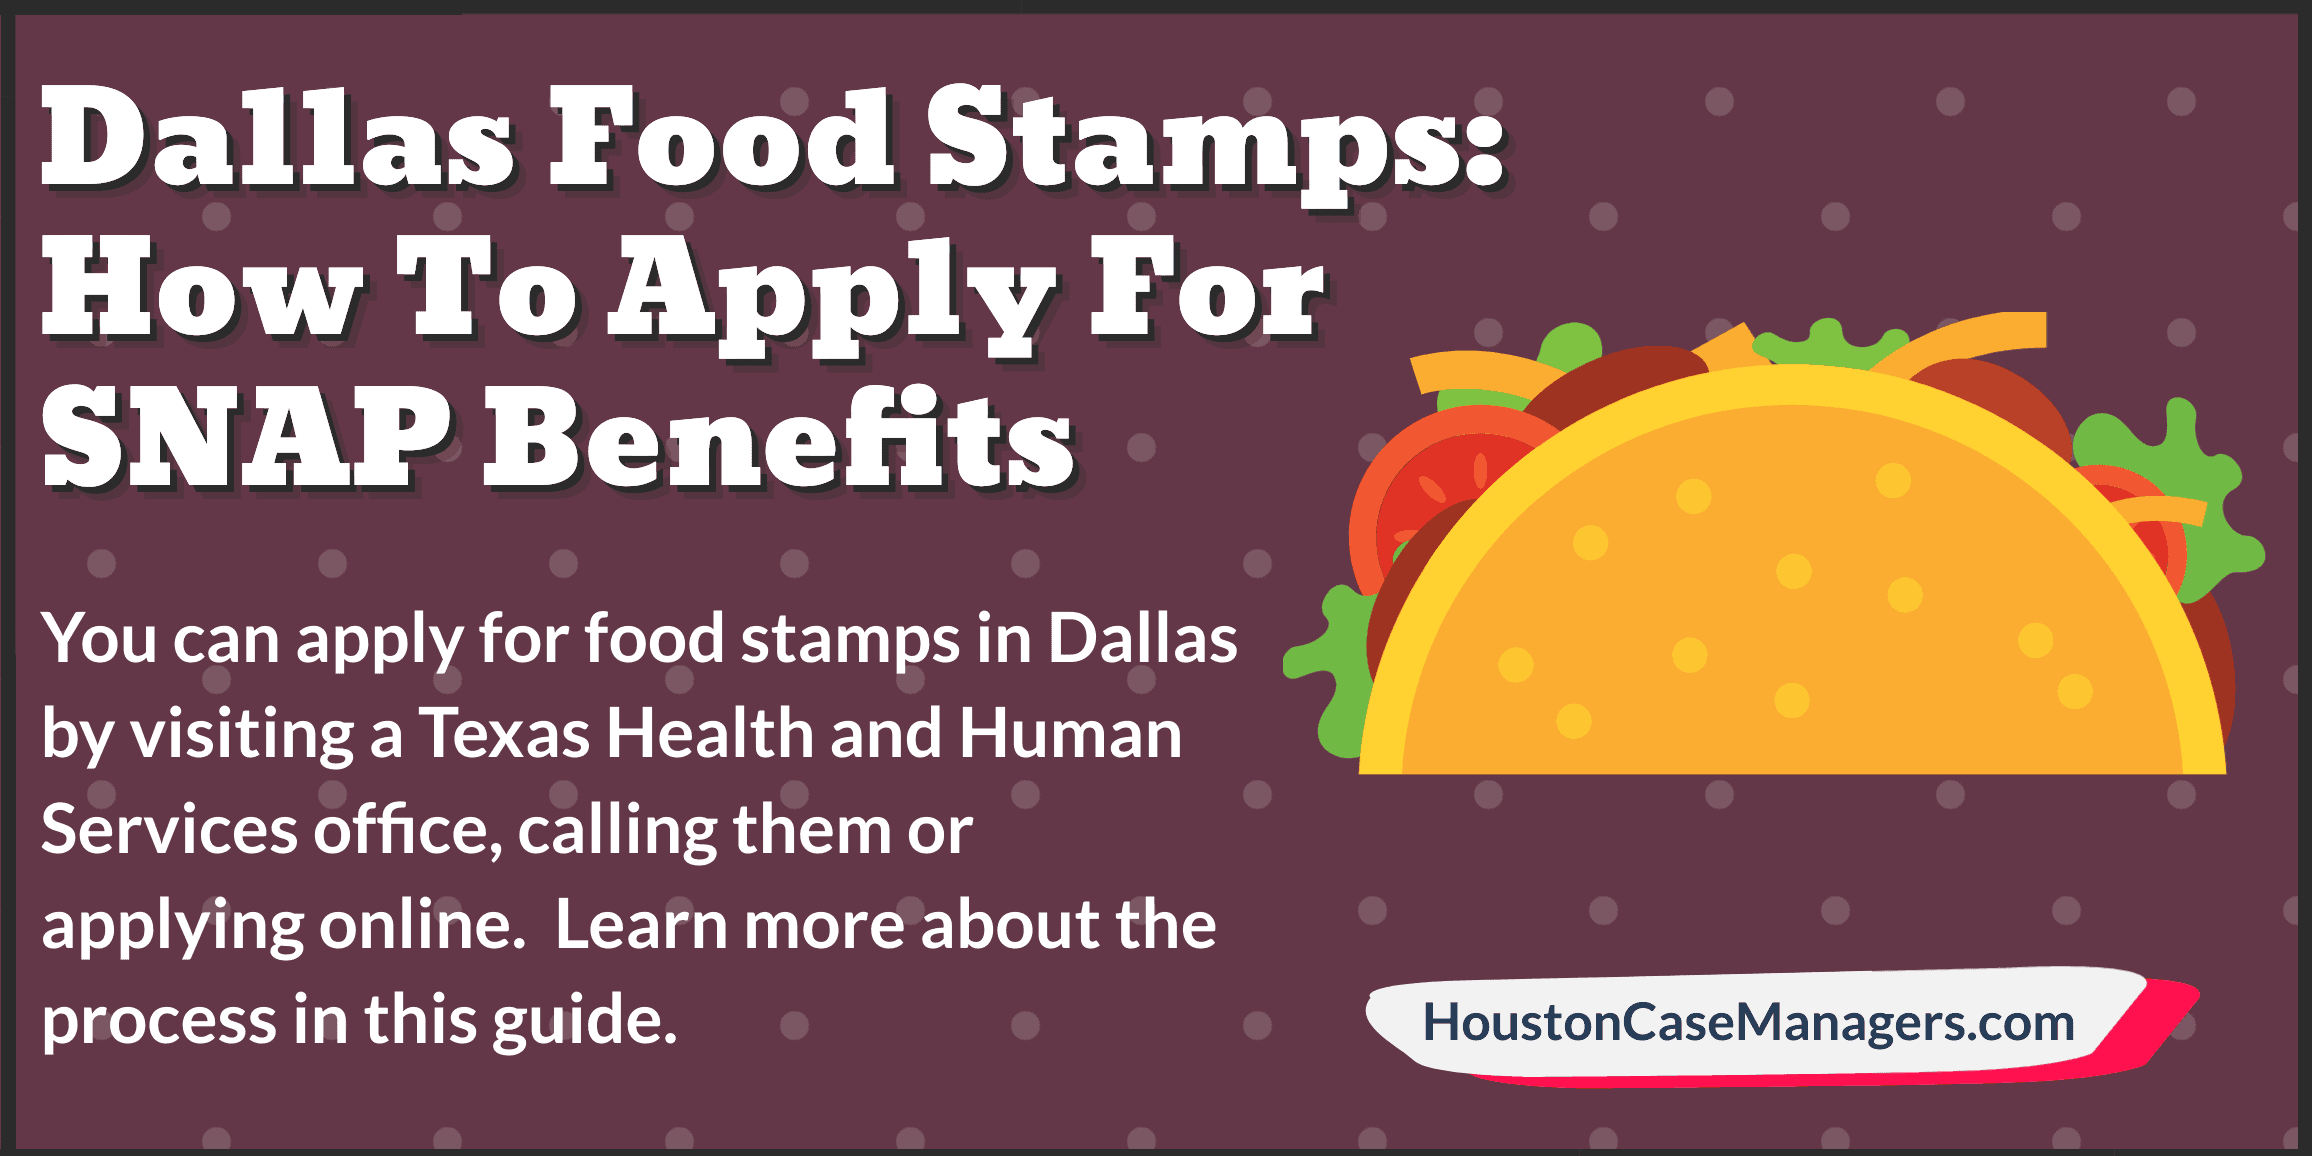 Dallas Food Stamps